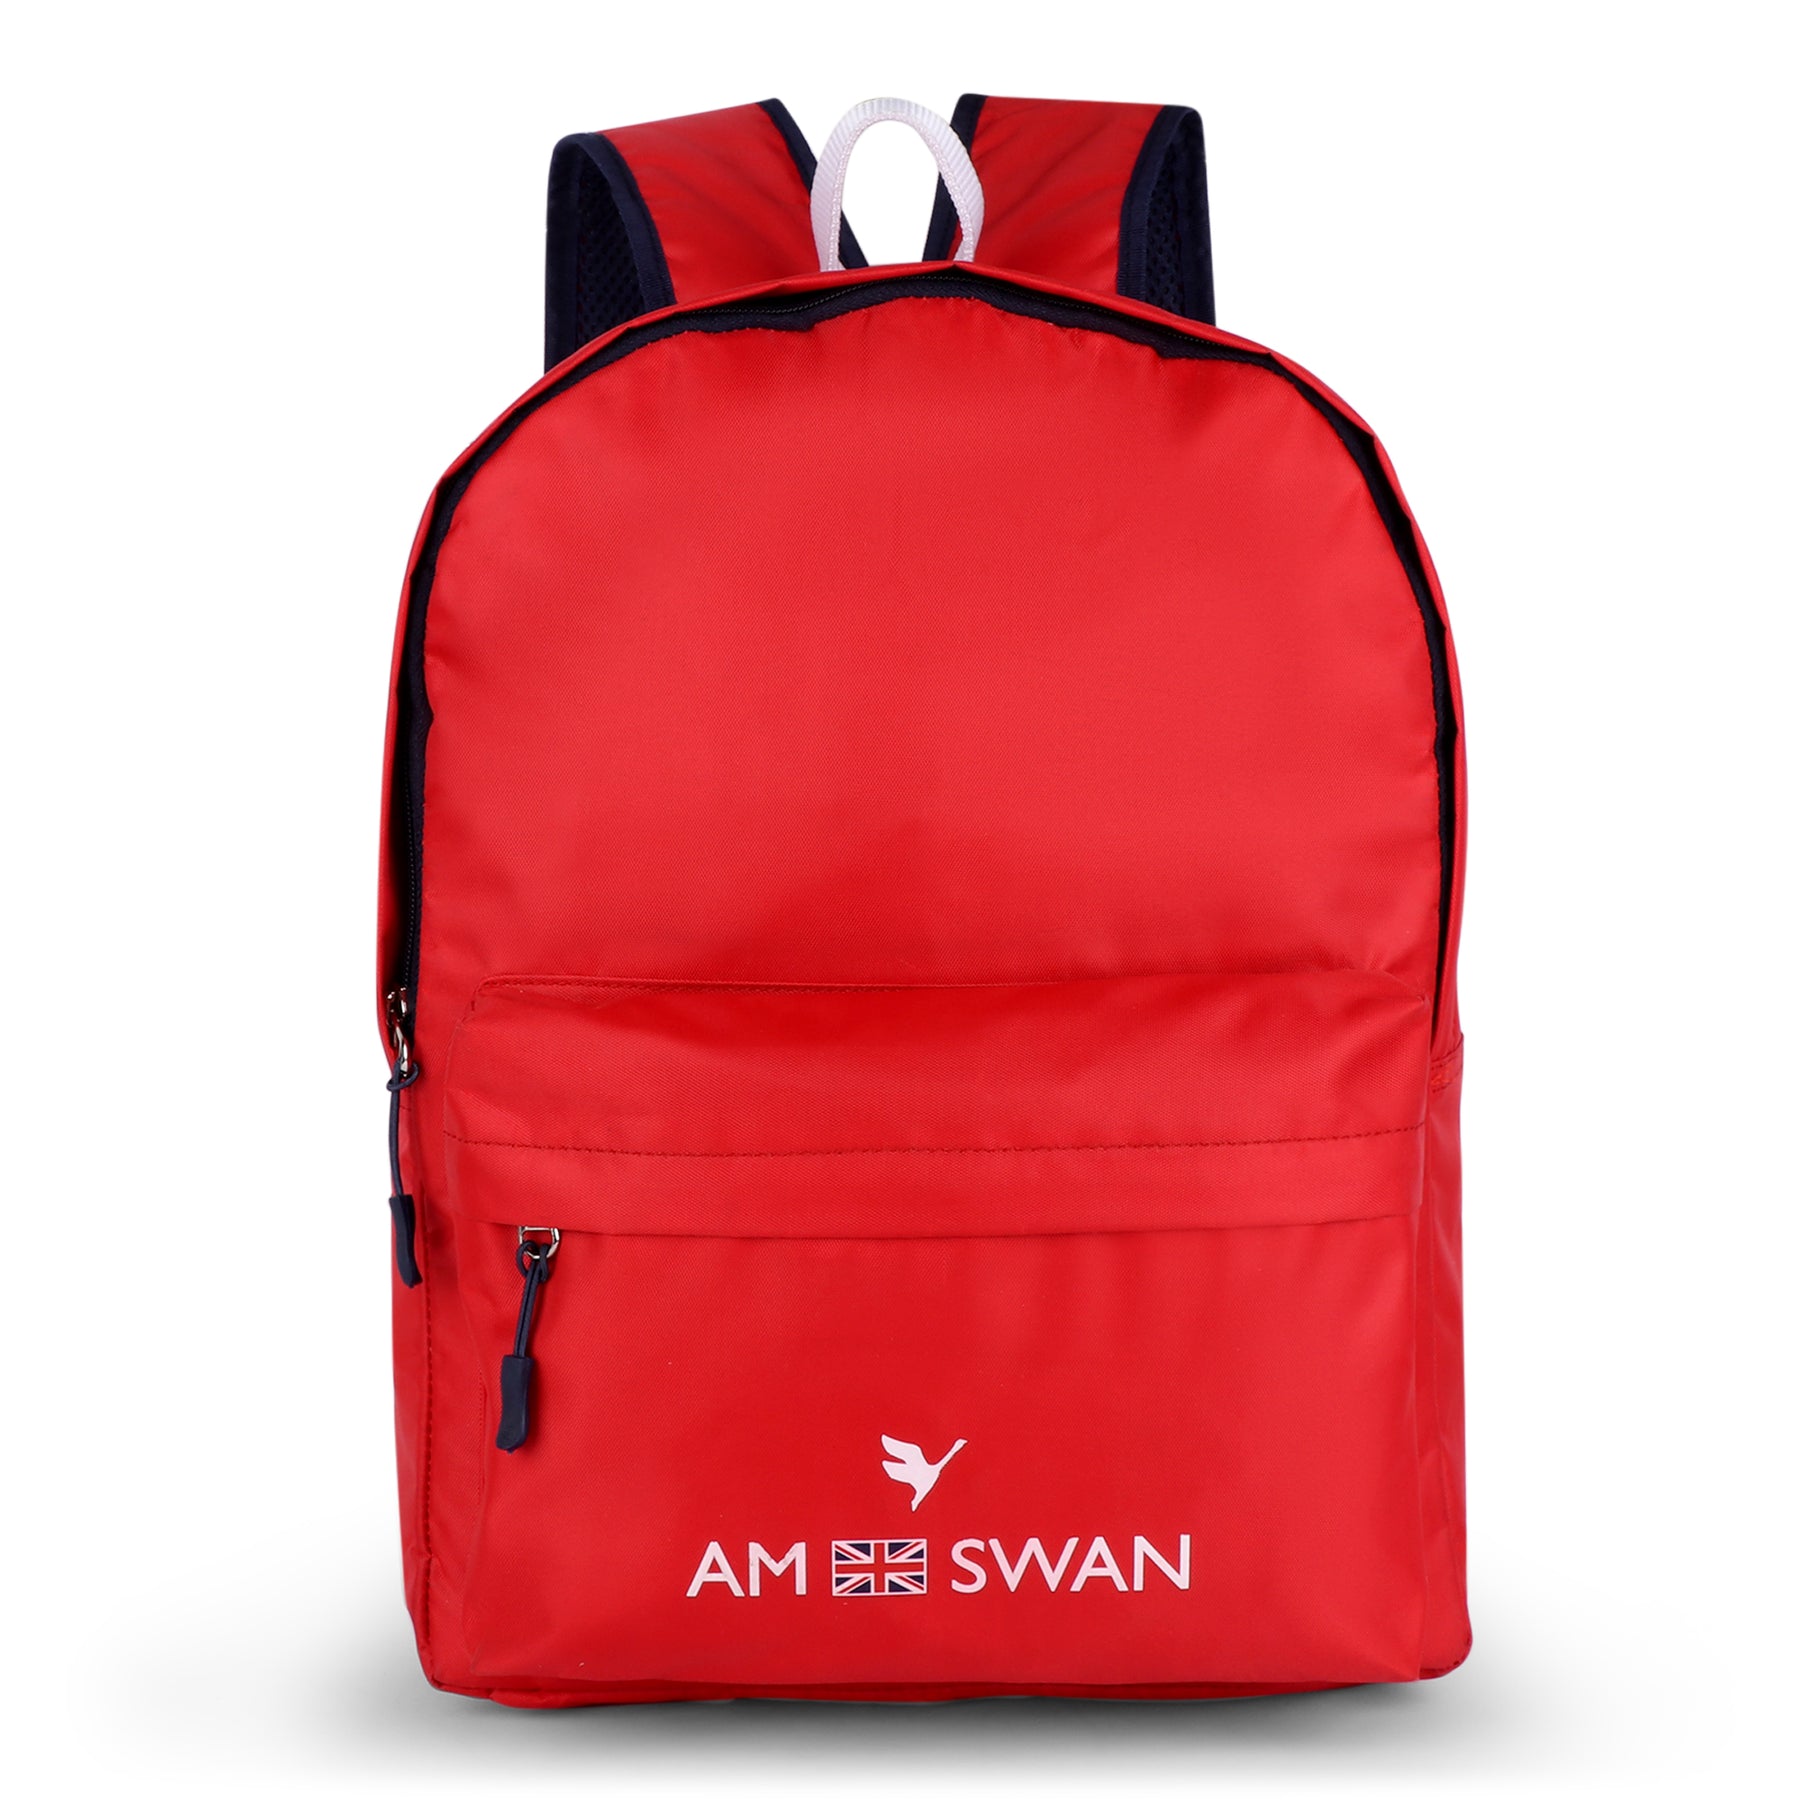 AMSWAN RED UNISEX BACKPACK